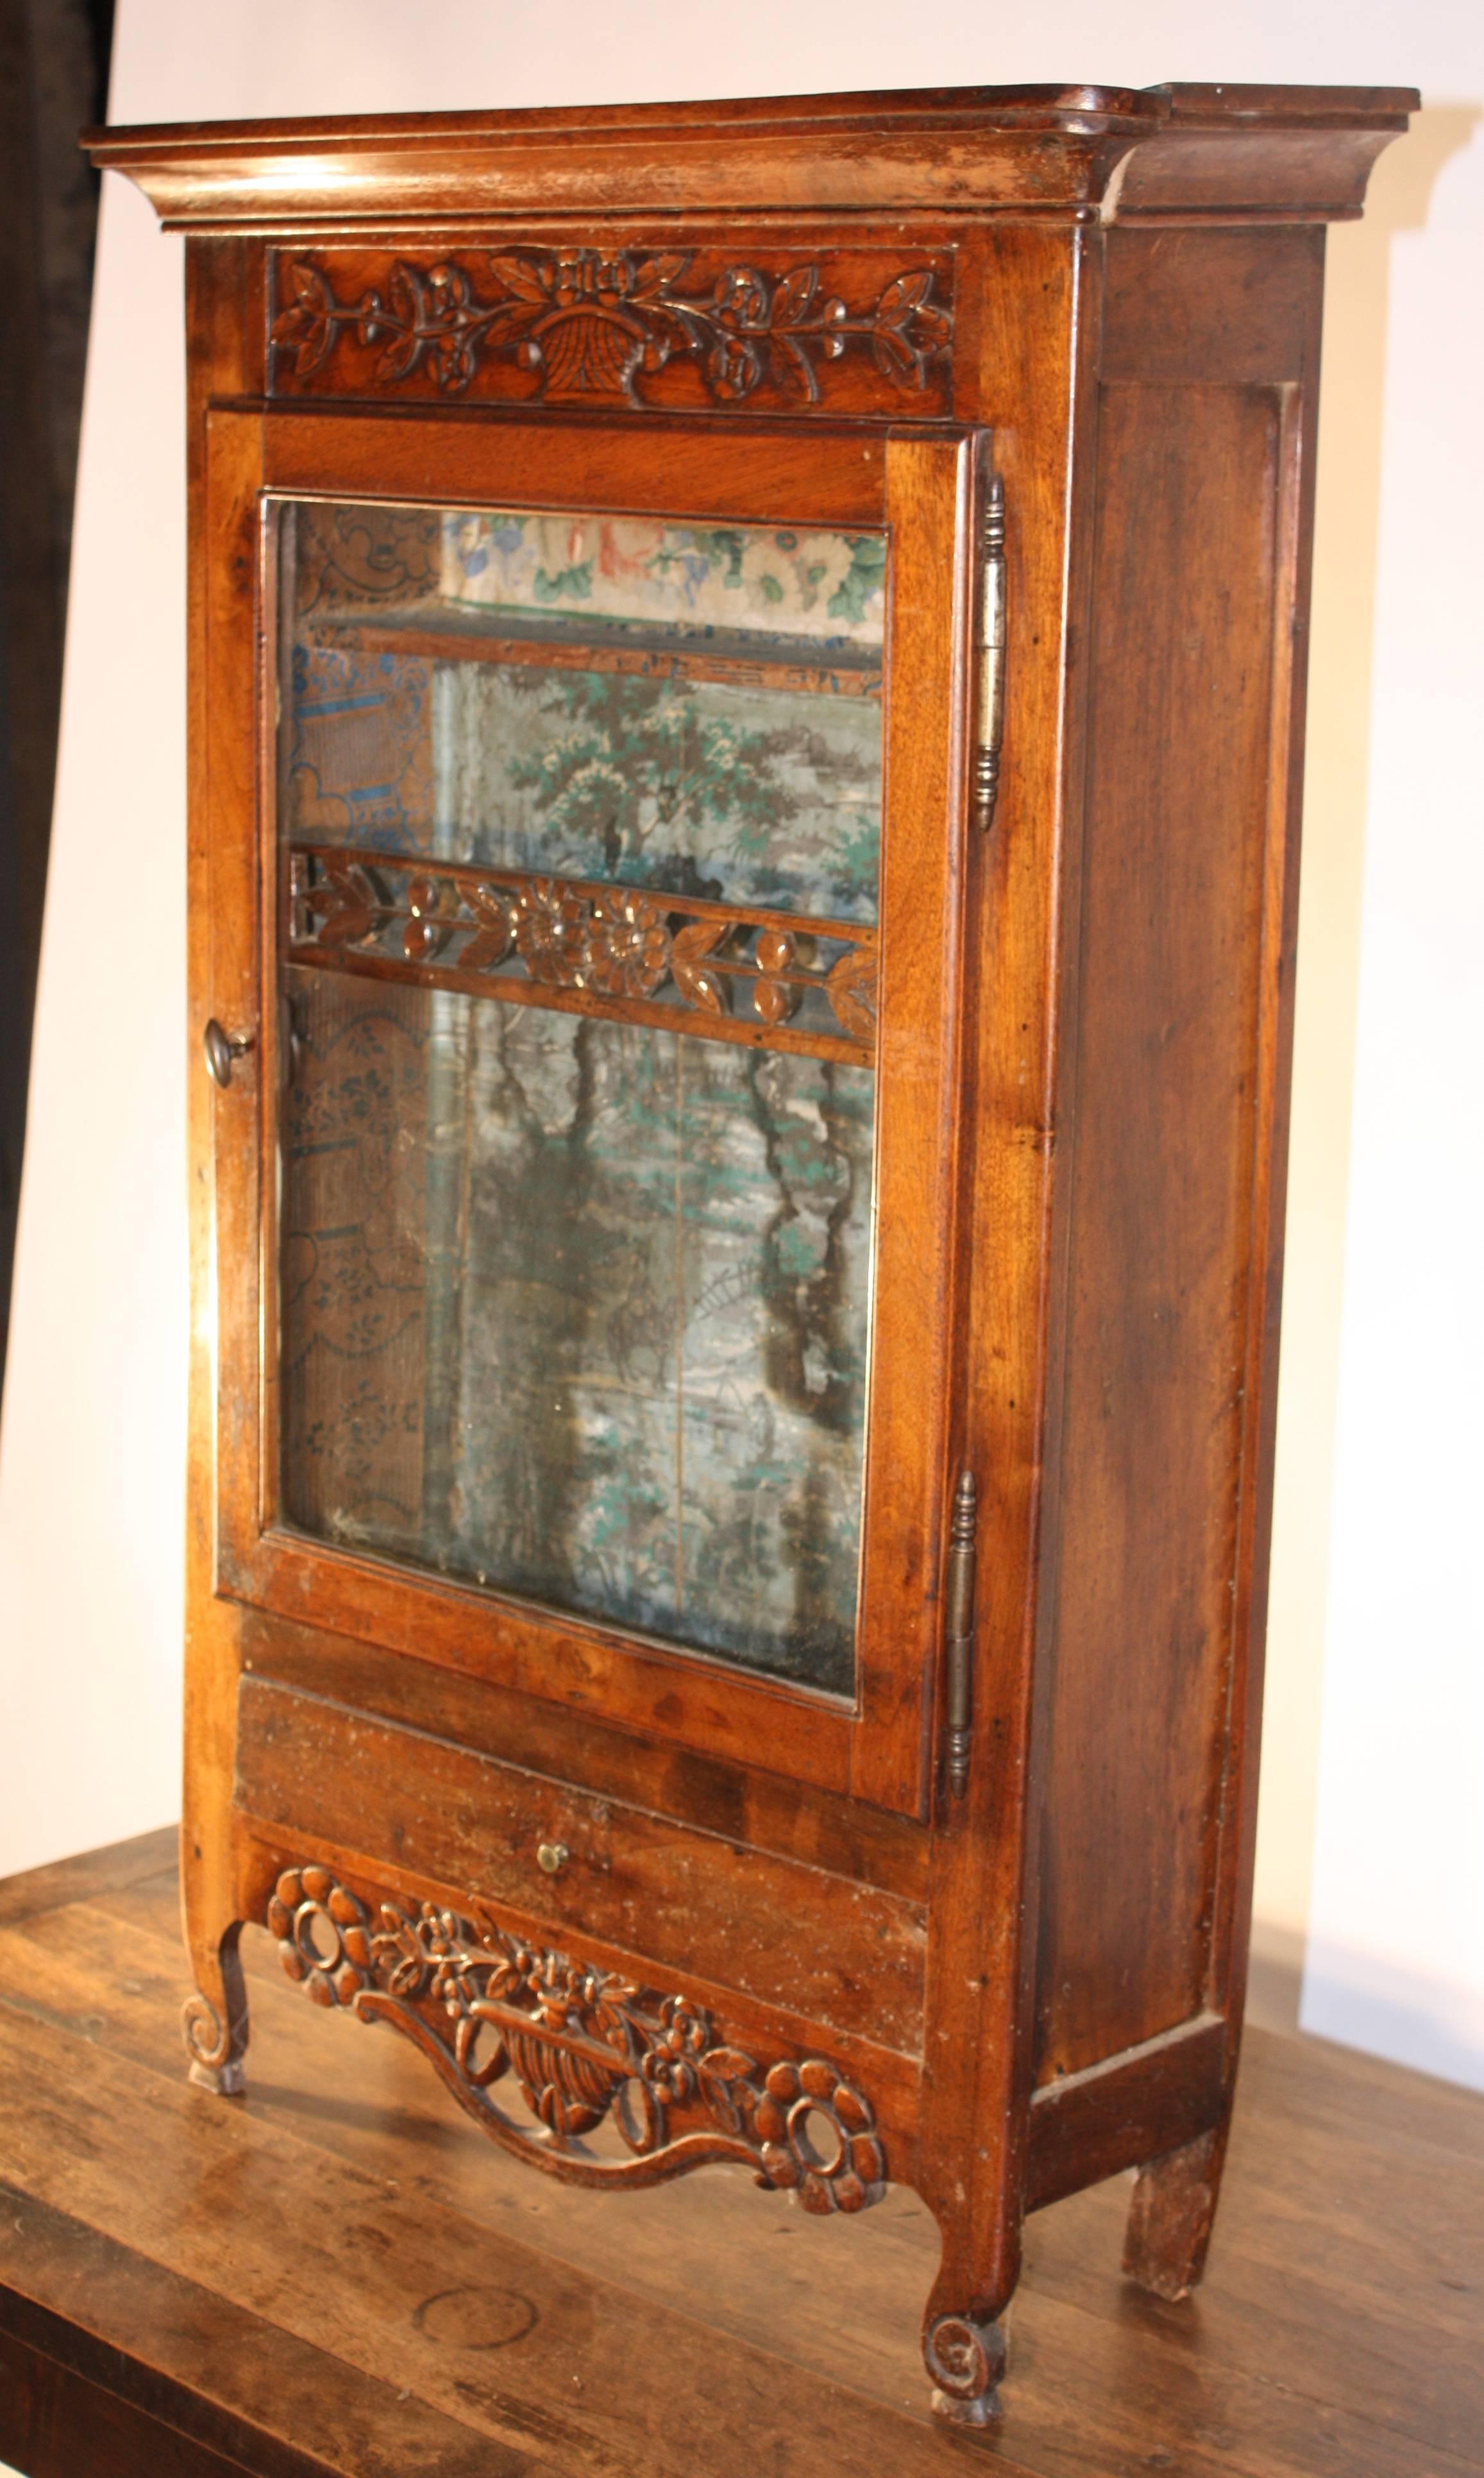 A great example of 18th century French furniture from Arles, this petite wall-hanging "verriere" is in the form of a miniature armoire in cherrywood, circa 1760, with a carved and pierced apron typical of the region. The interior is lined